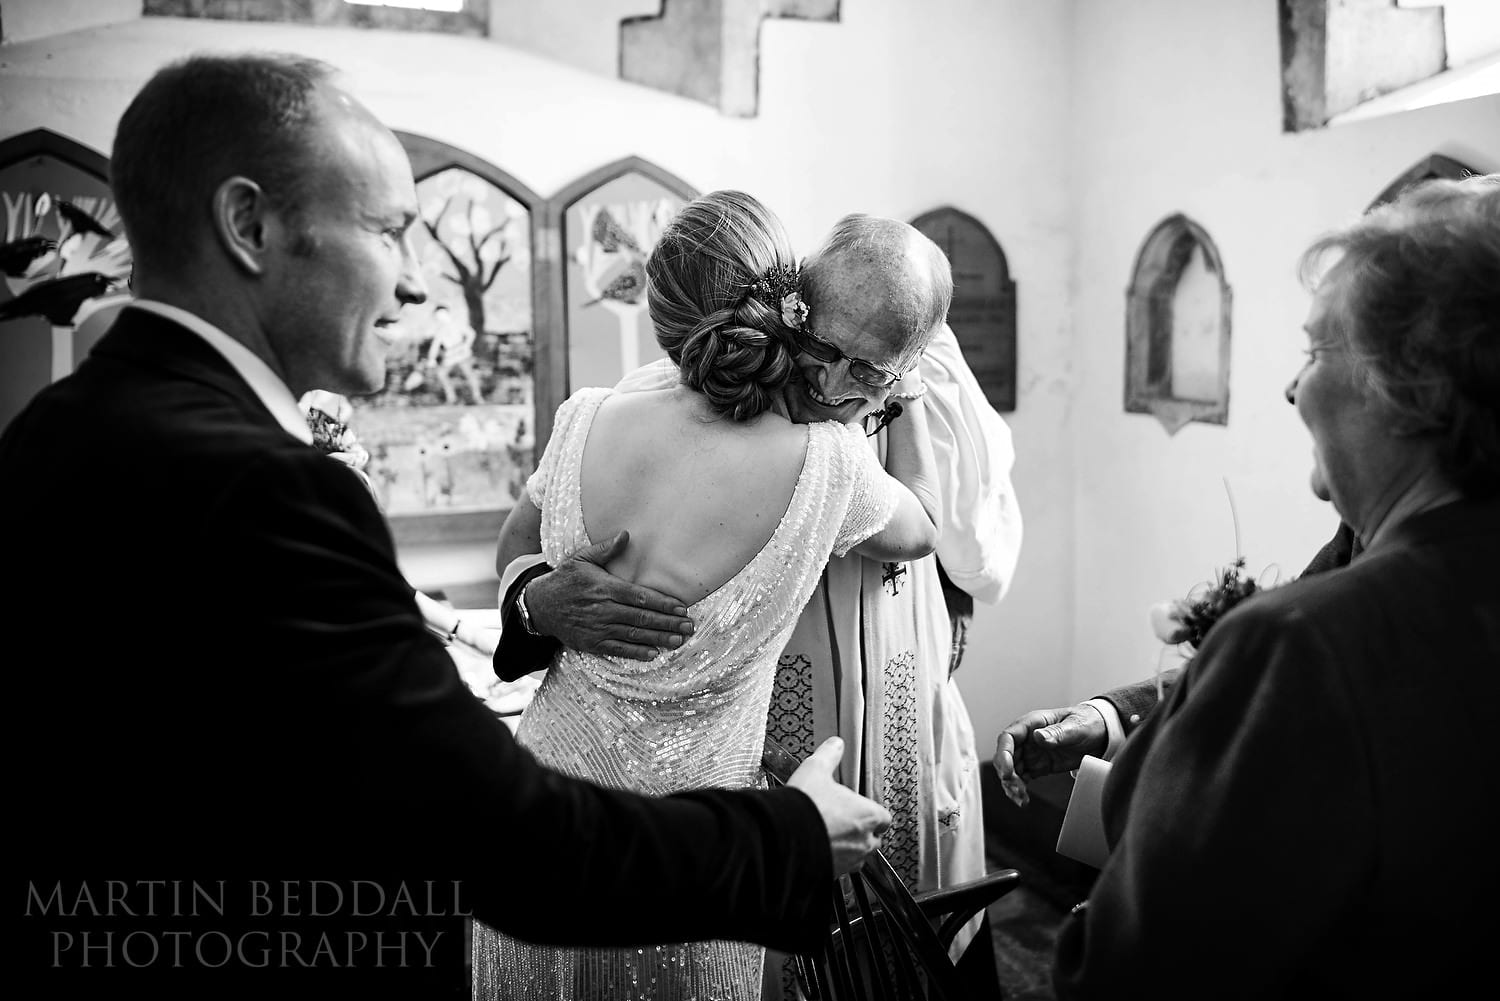 Hug for the bride from the vicar